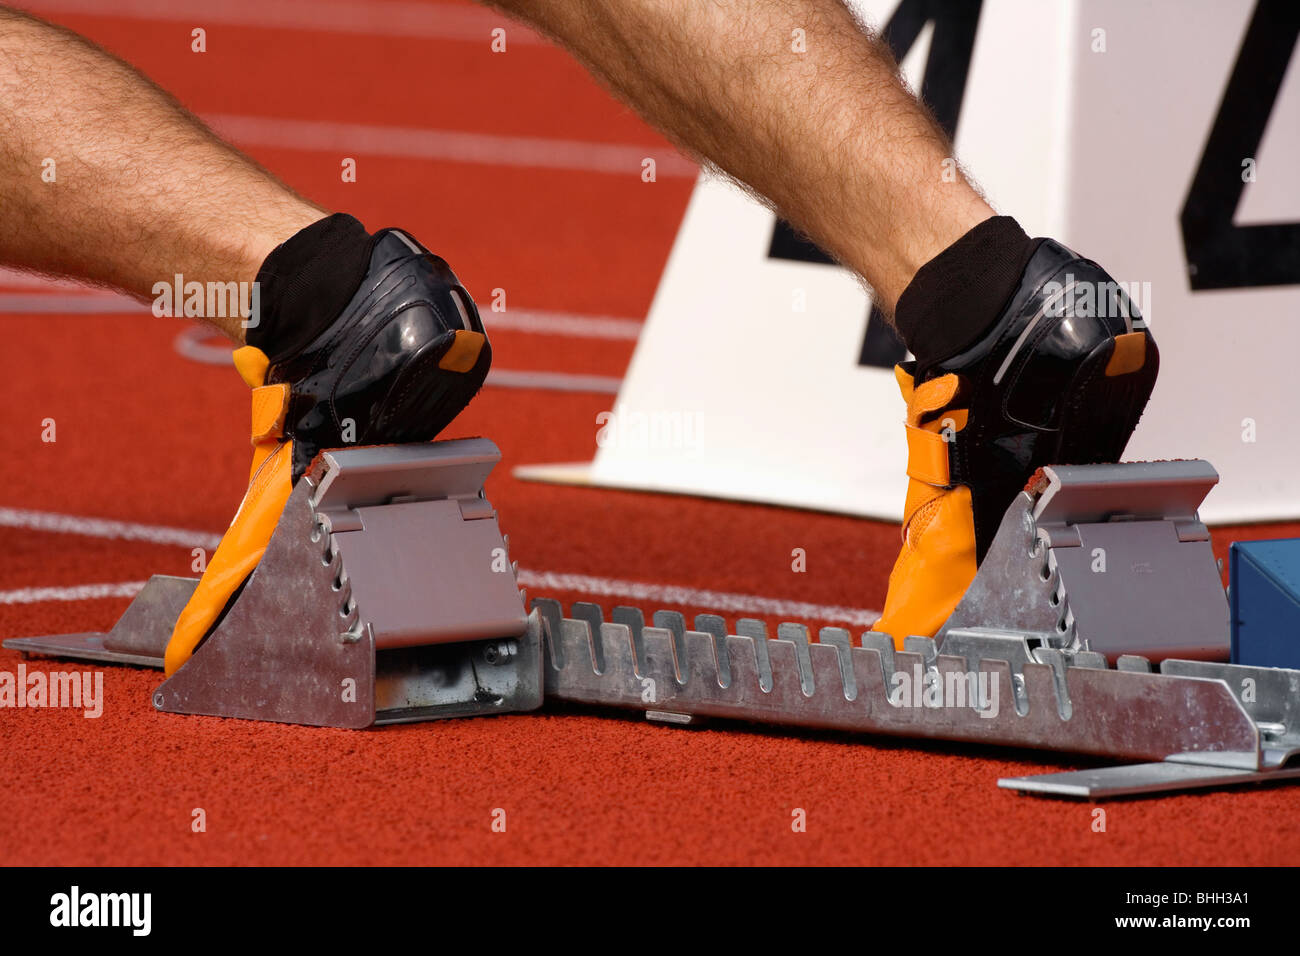 sport - runner at starting block in running competition Stock Photo